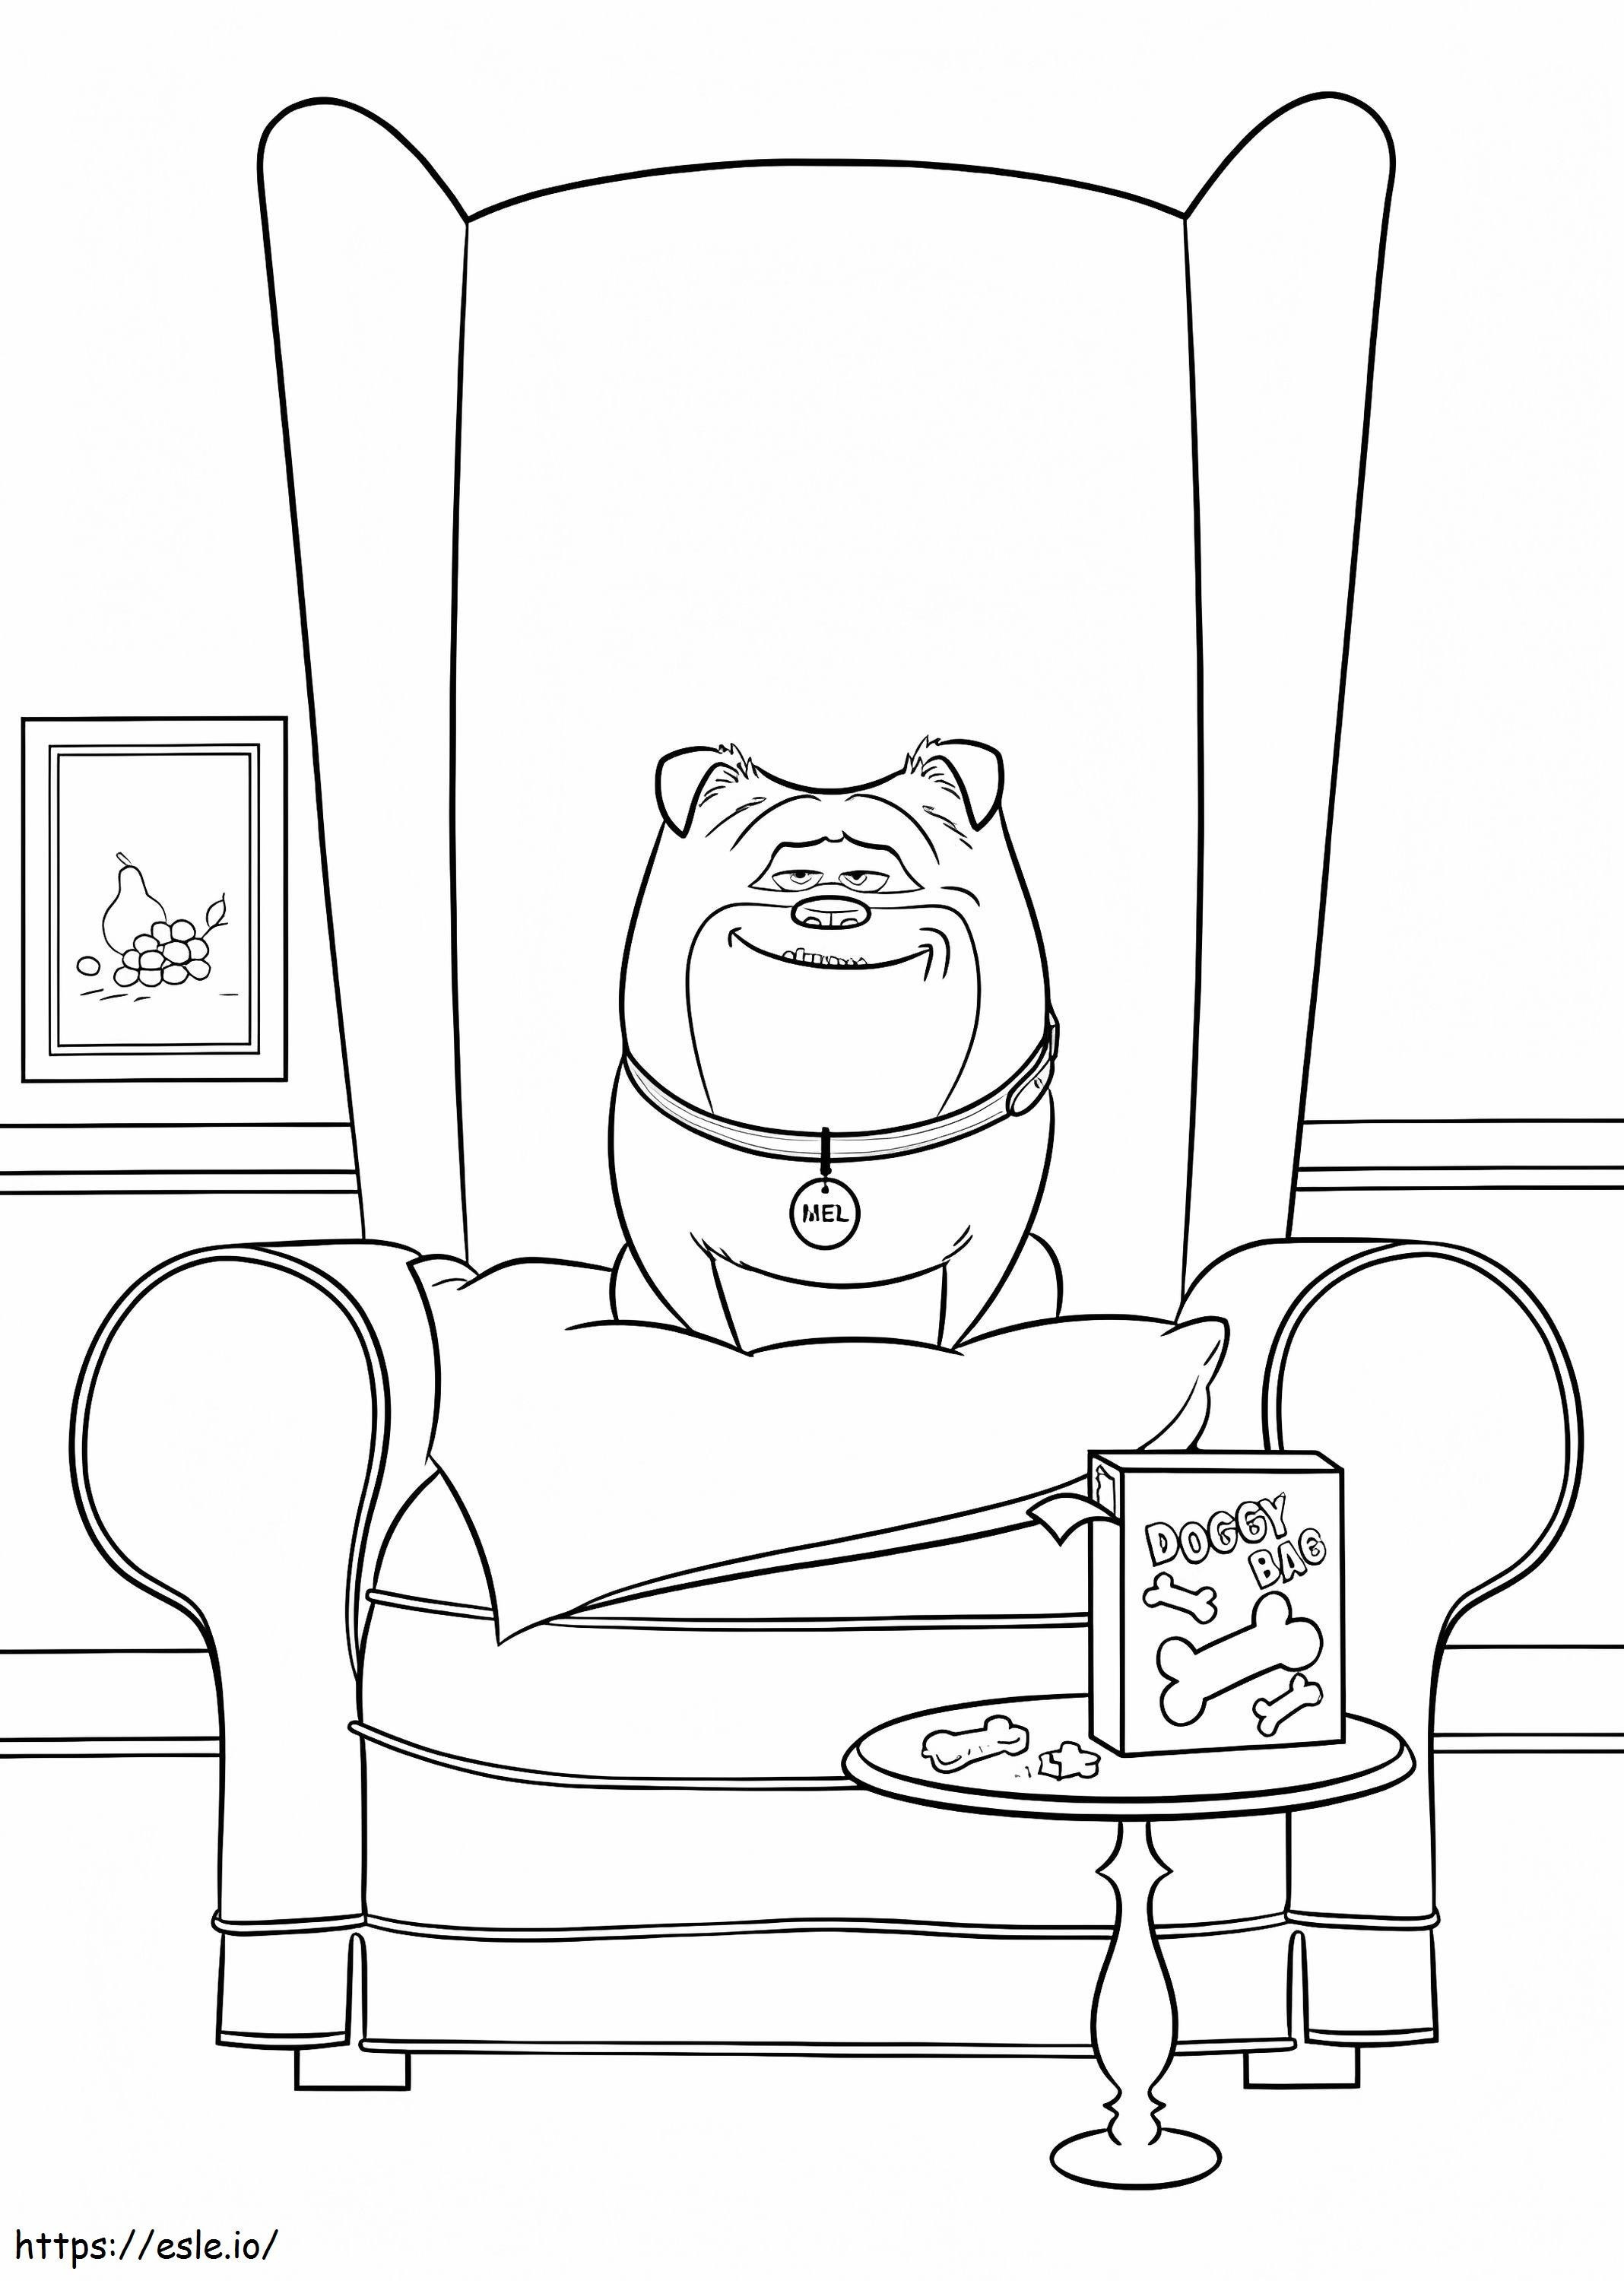 1559695613 Mel Smiling A4 coloring page